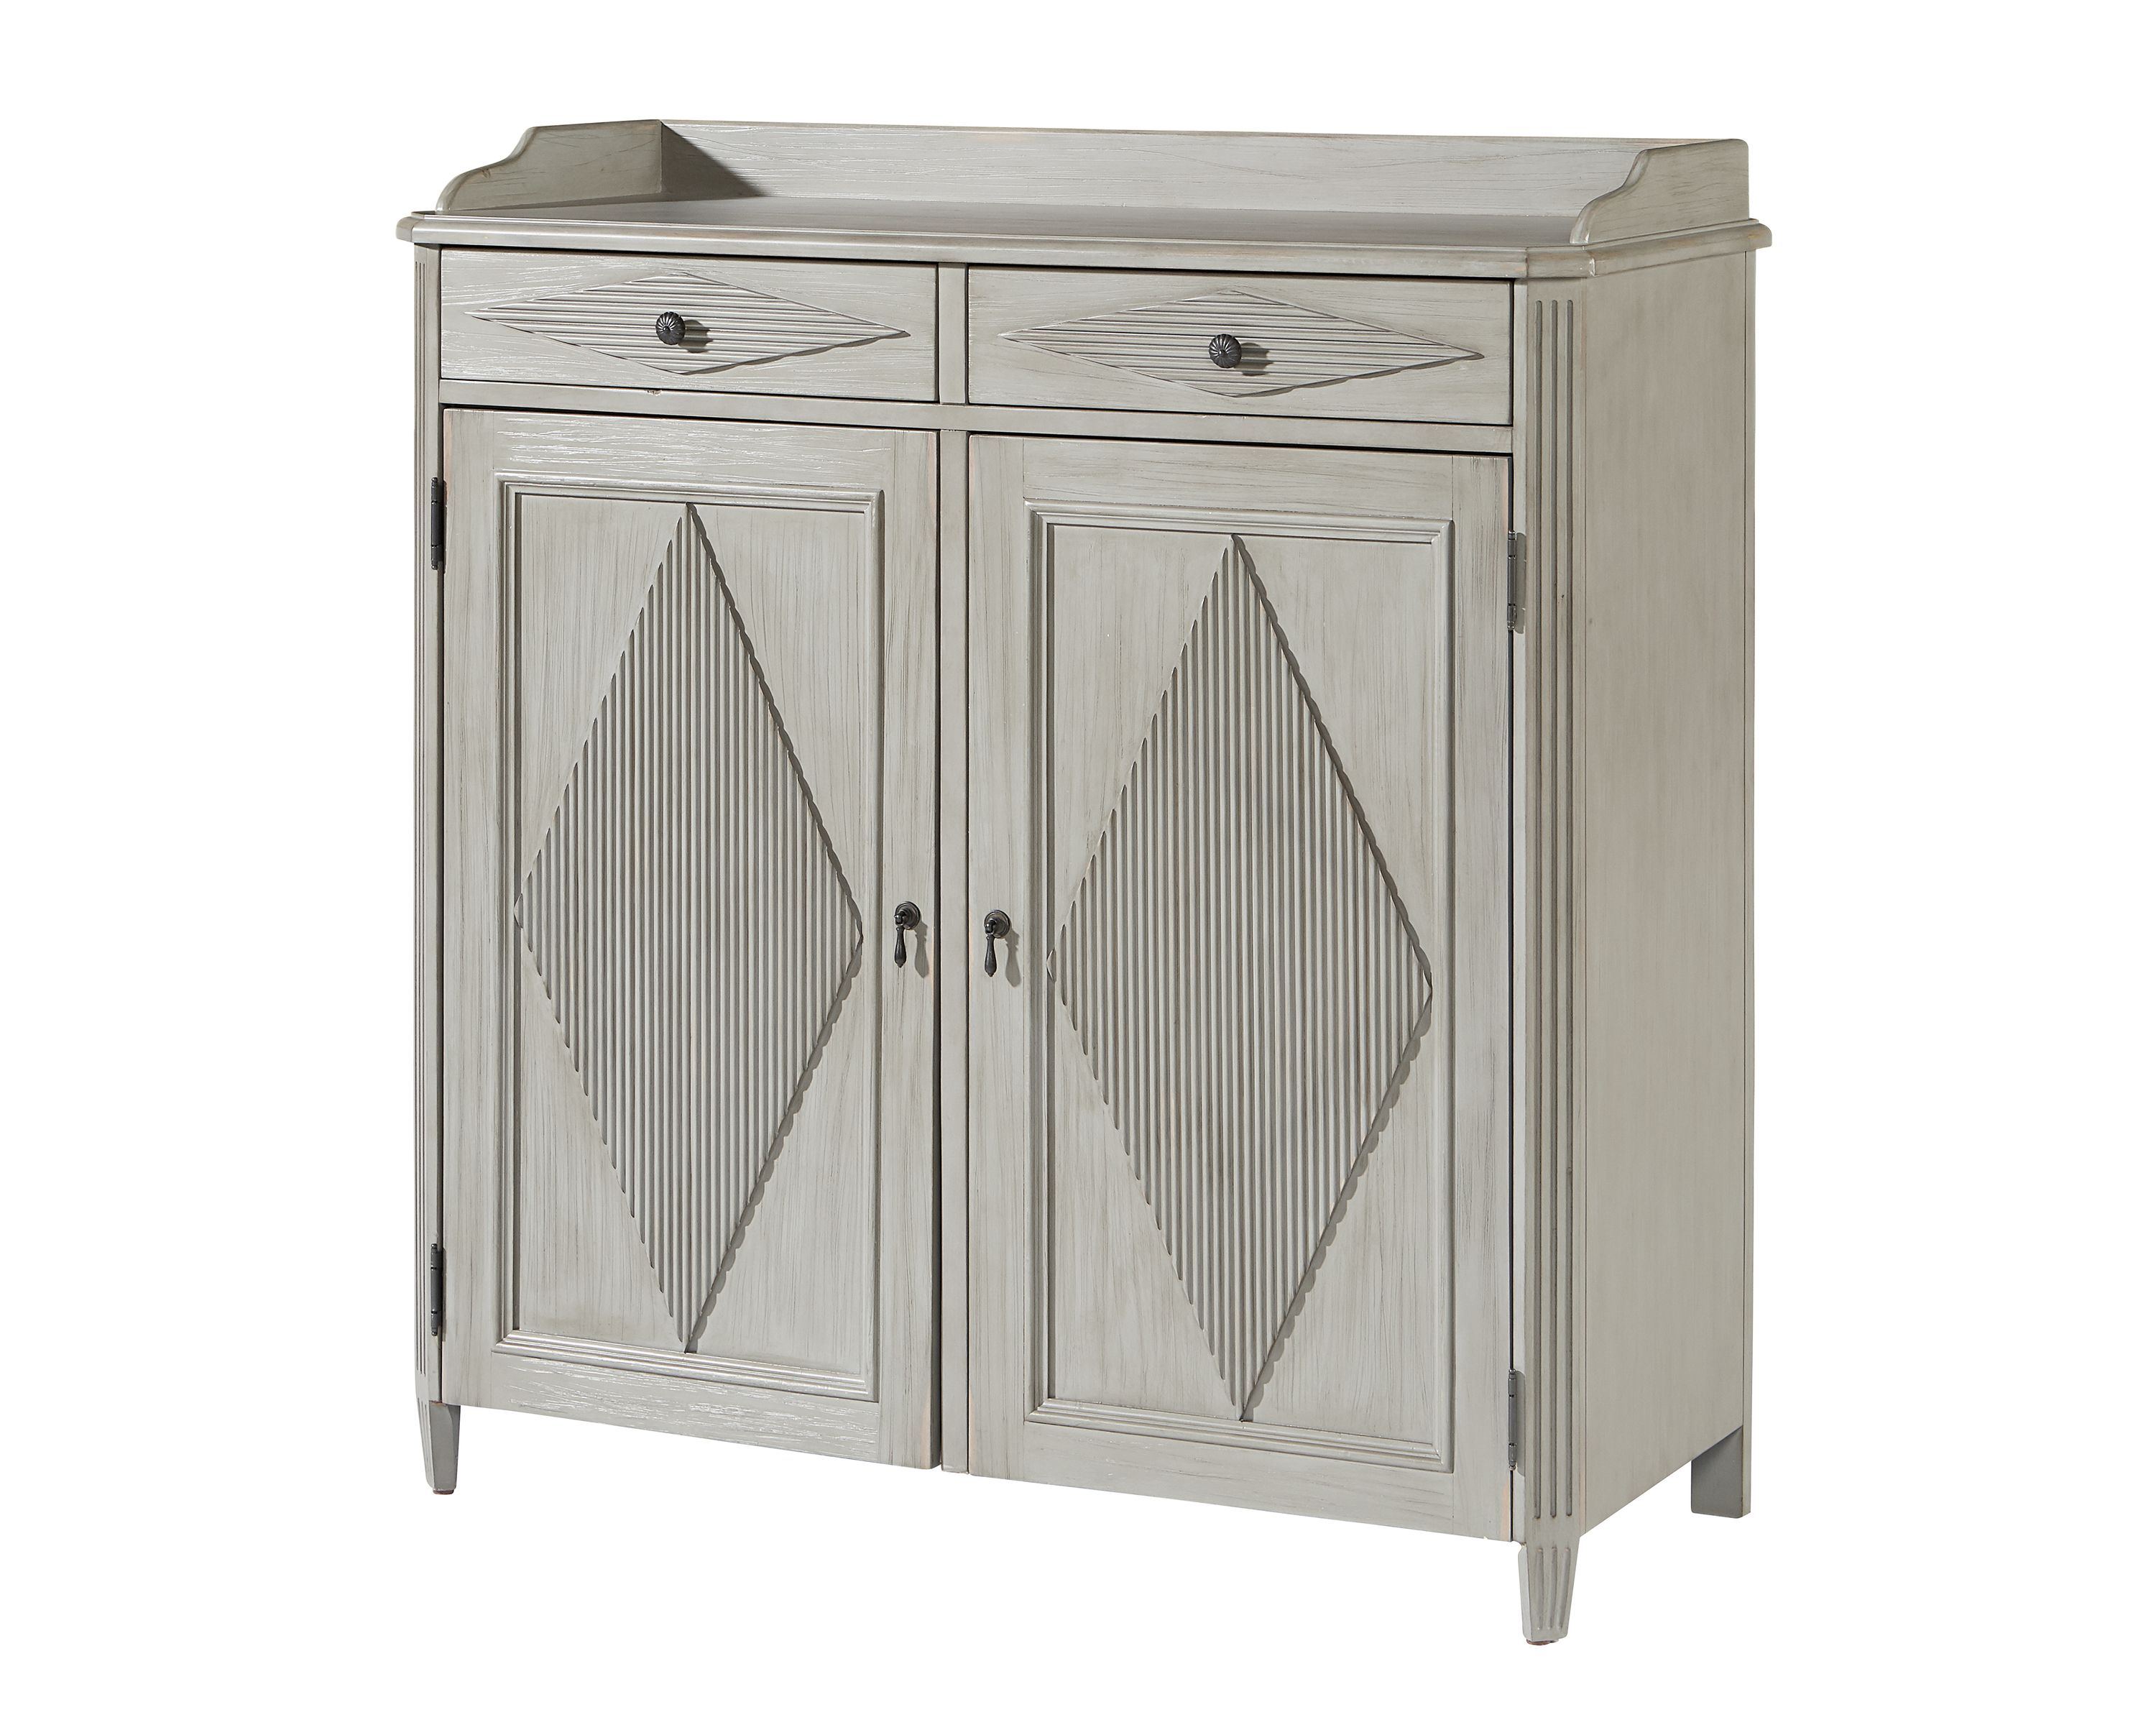 Most Recently Released Magnolia Home Dylan Sideboards By Joanna Gaines Pertaining To Dylan Sideboard – Magnolia Home (View 1 of 20)